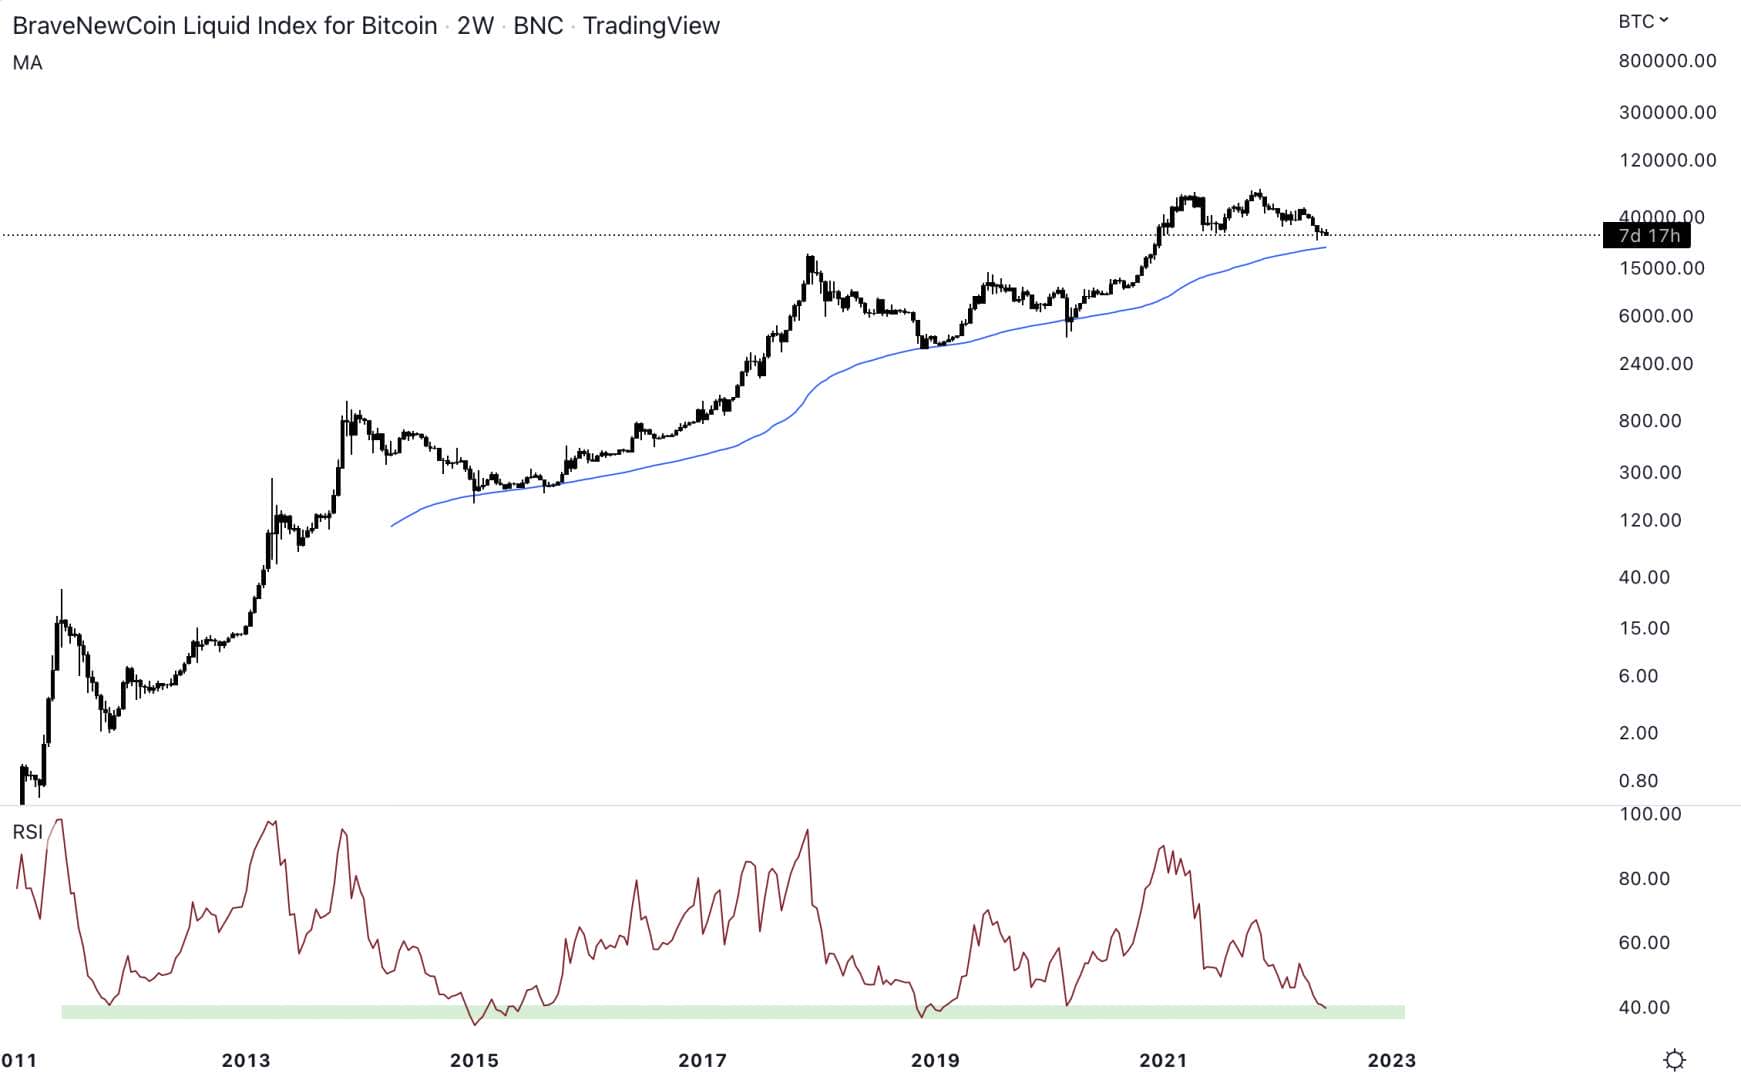 Bitcoin could join the 100 period moving average in 2W at $22,000.